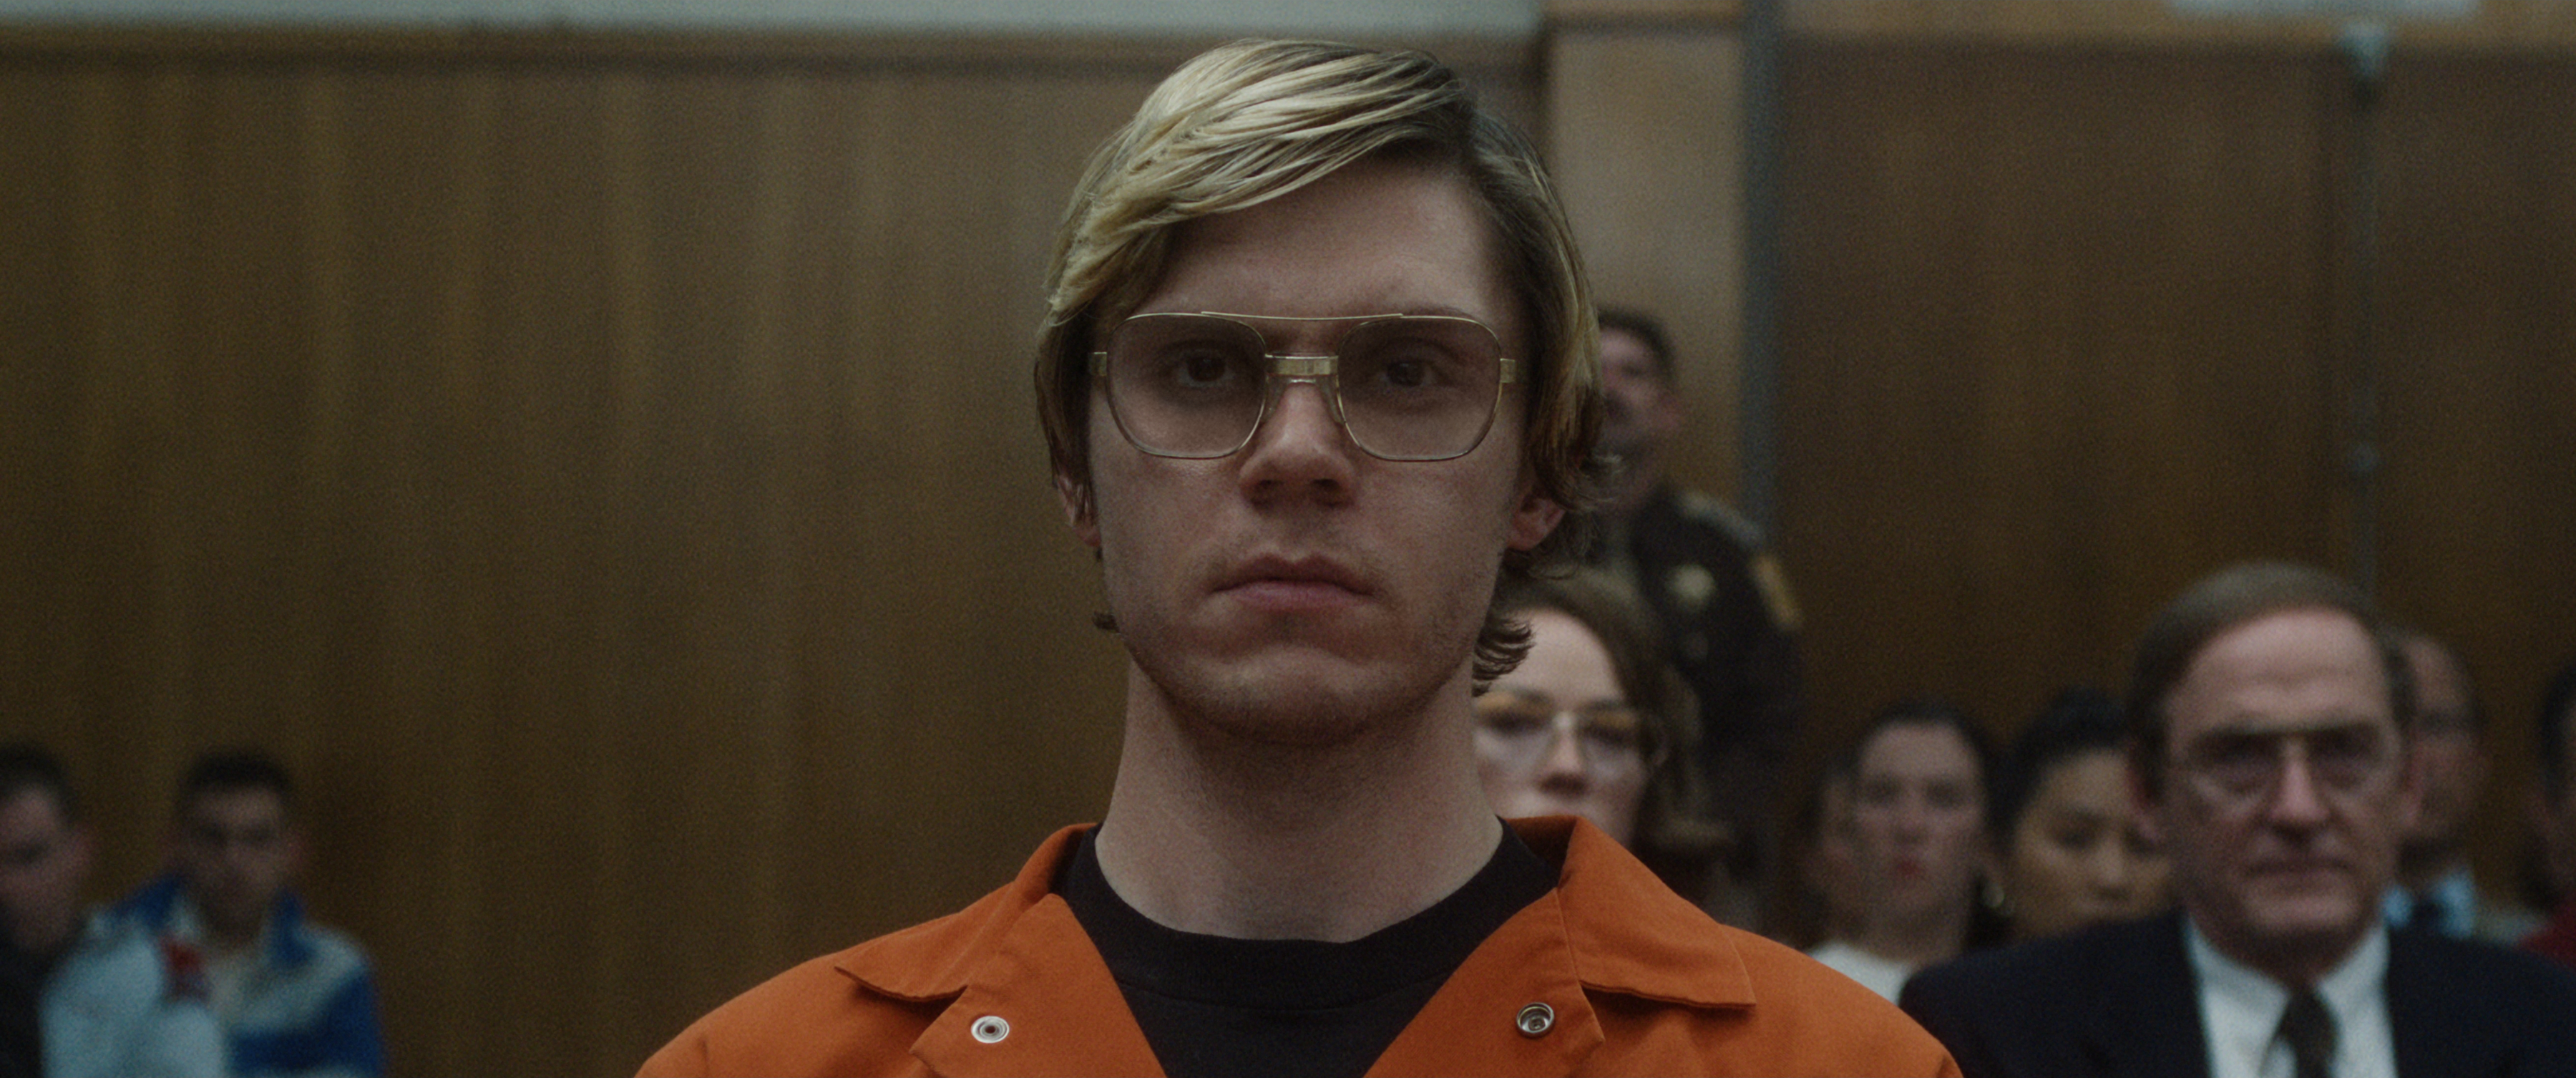 Dahmer - Monster: The Jeffrey Dahmer Story Soundtrack on Netflix - Every Song in Episode 8